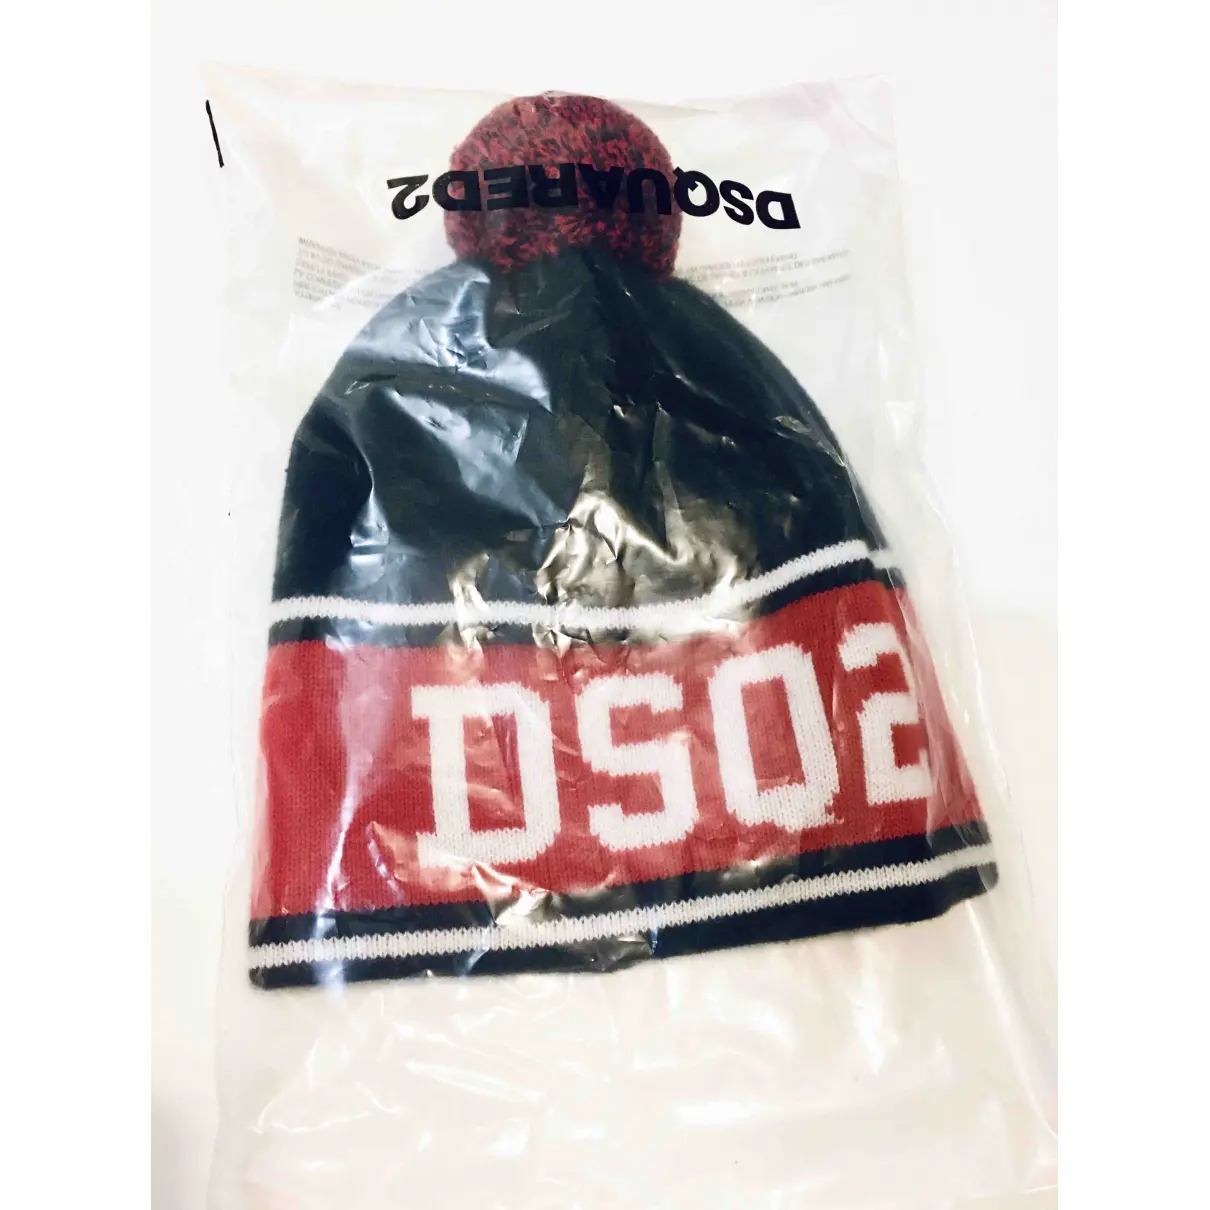 Wool hat Dsquared2